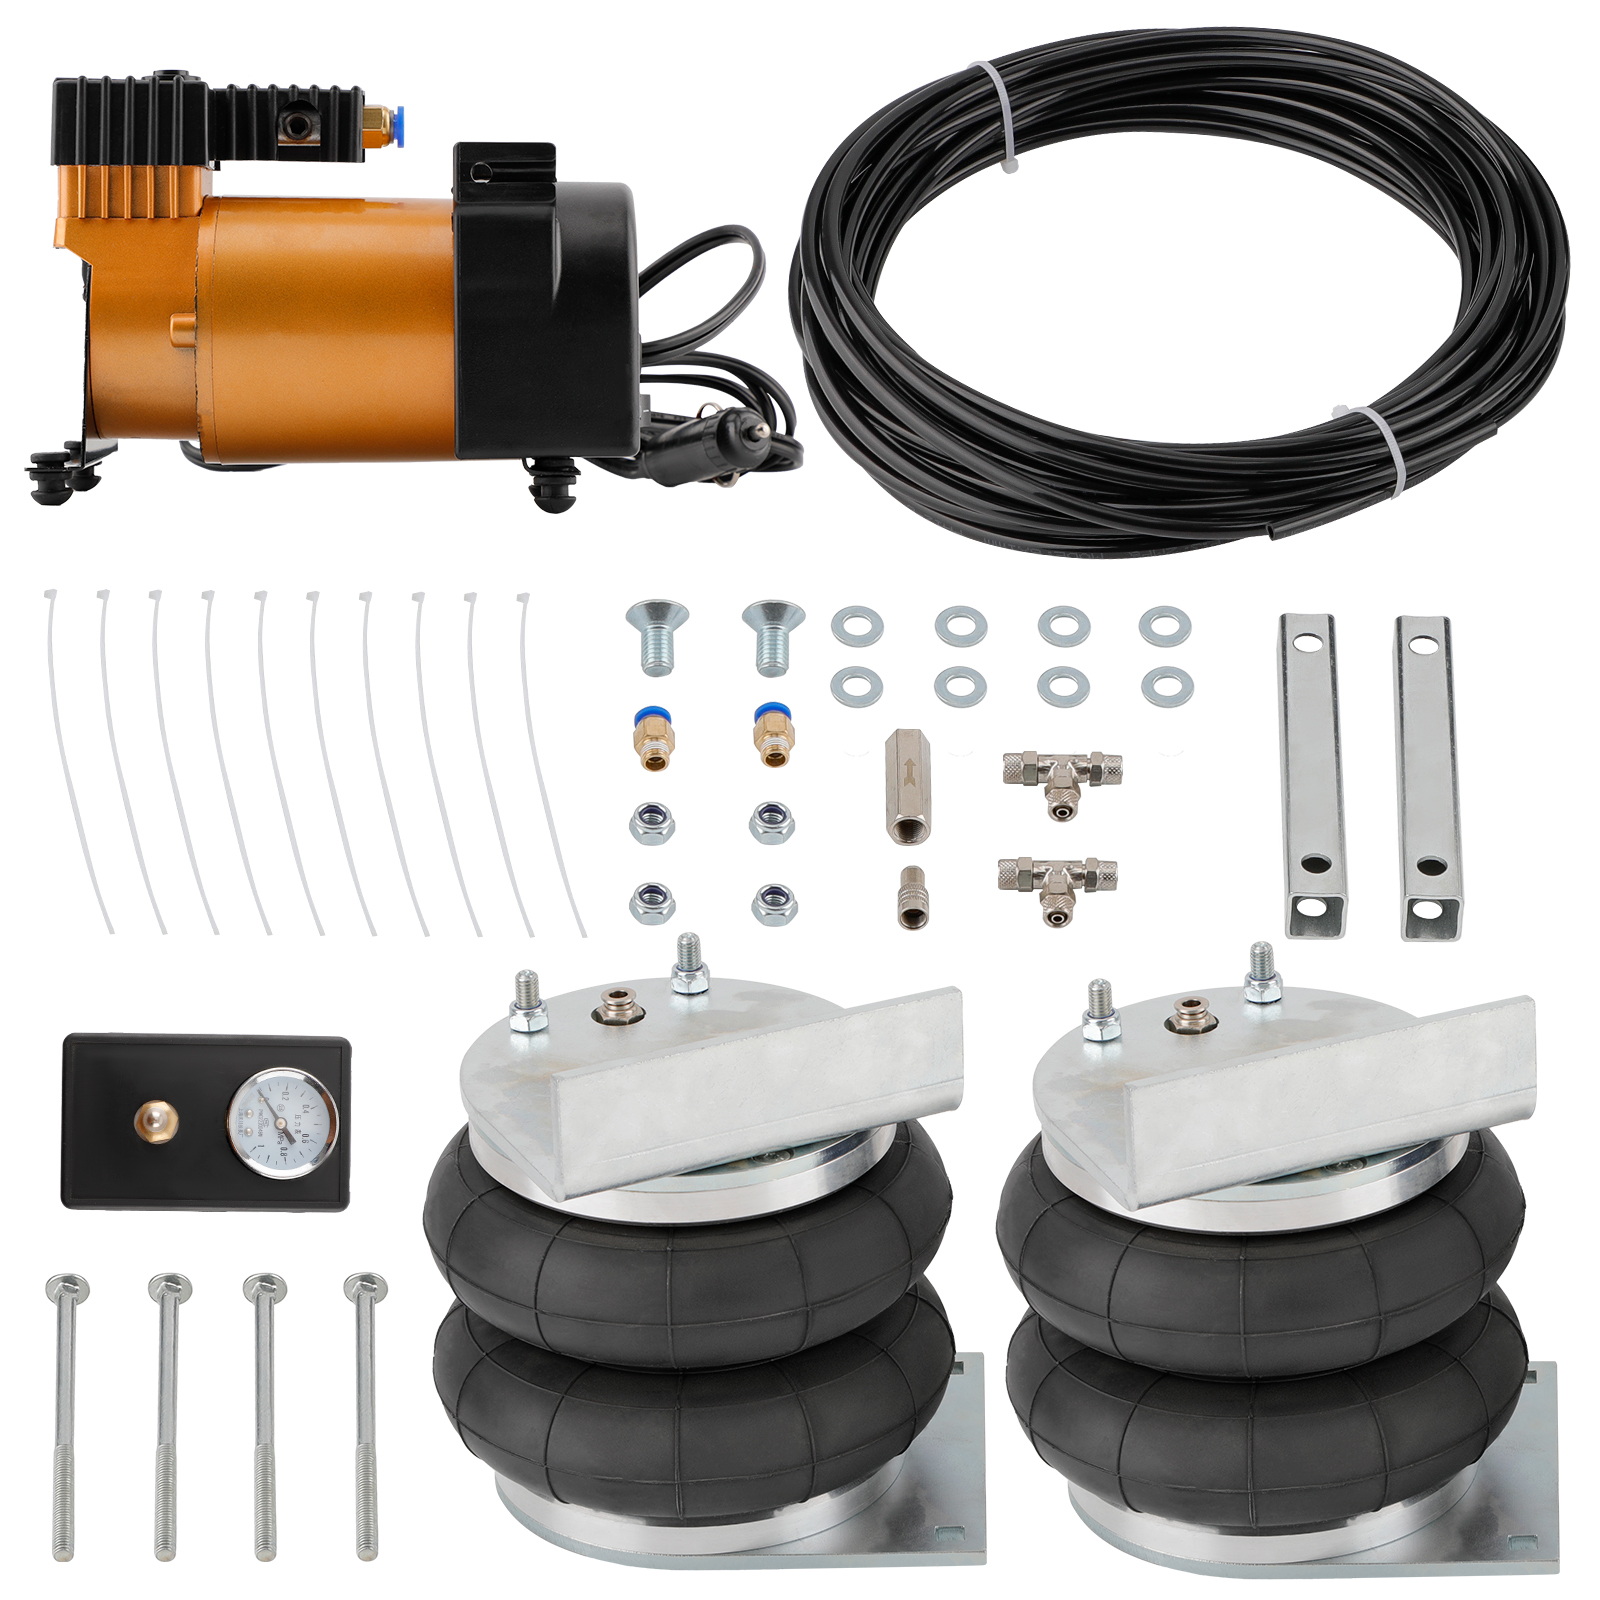 Amazon.com: Vixen Air Suspension Kit for Truck/Car Bag/Air Ride/Spring. On  Board System- Dual 200psi Compressor, 3 Gallon Tank. for Boat  Lift,Towing,Lowering,Load Leveling,Bags,Onboard Train Horn VXO4831DBF :  Automotive